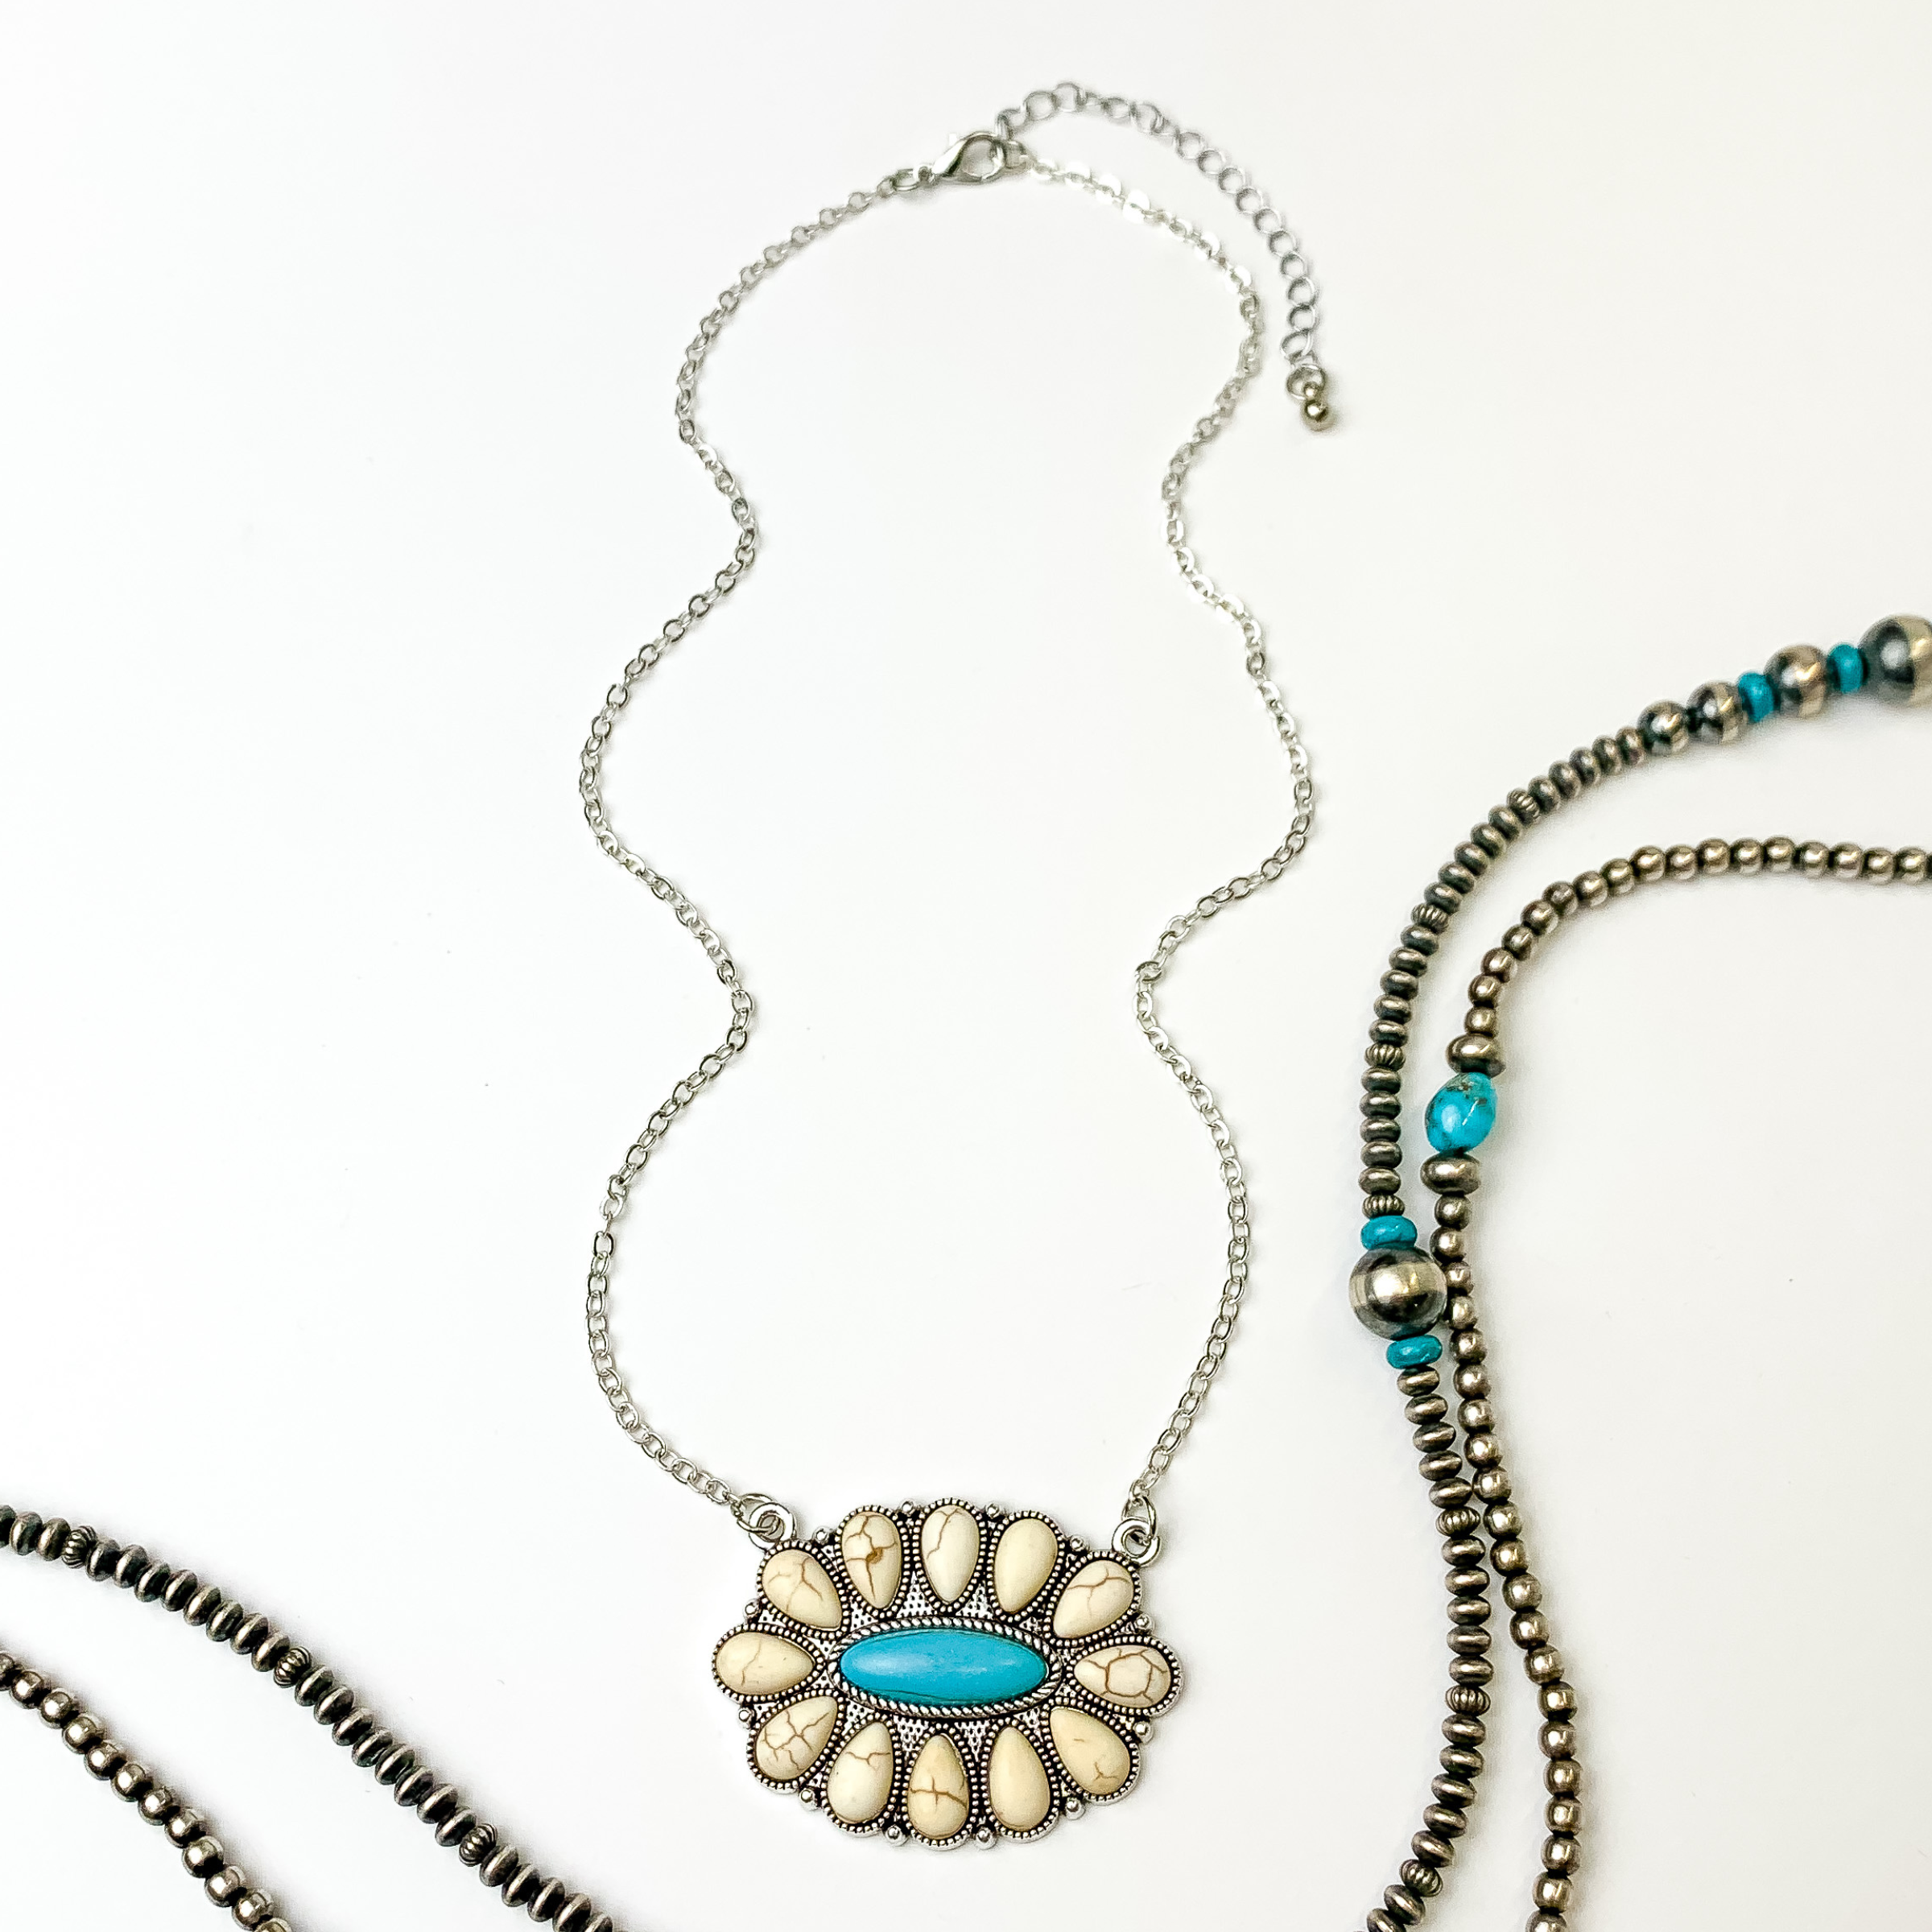 Silver chain necklace with oval cluster pendant. This pendant is mostly made up of ivory stones with a center turquoise stone. This necklace is pictured on an white background with silver and turquoise beads on the right side of the picture.